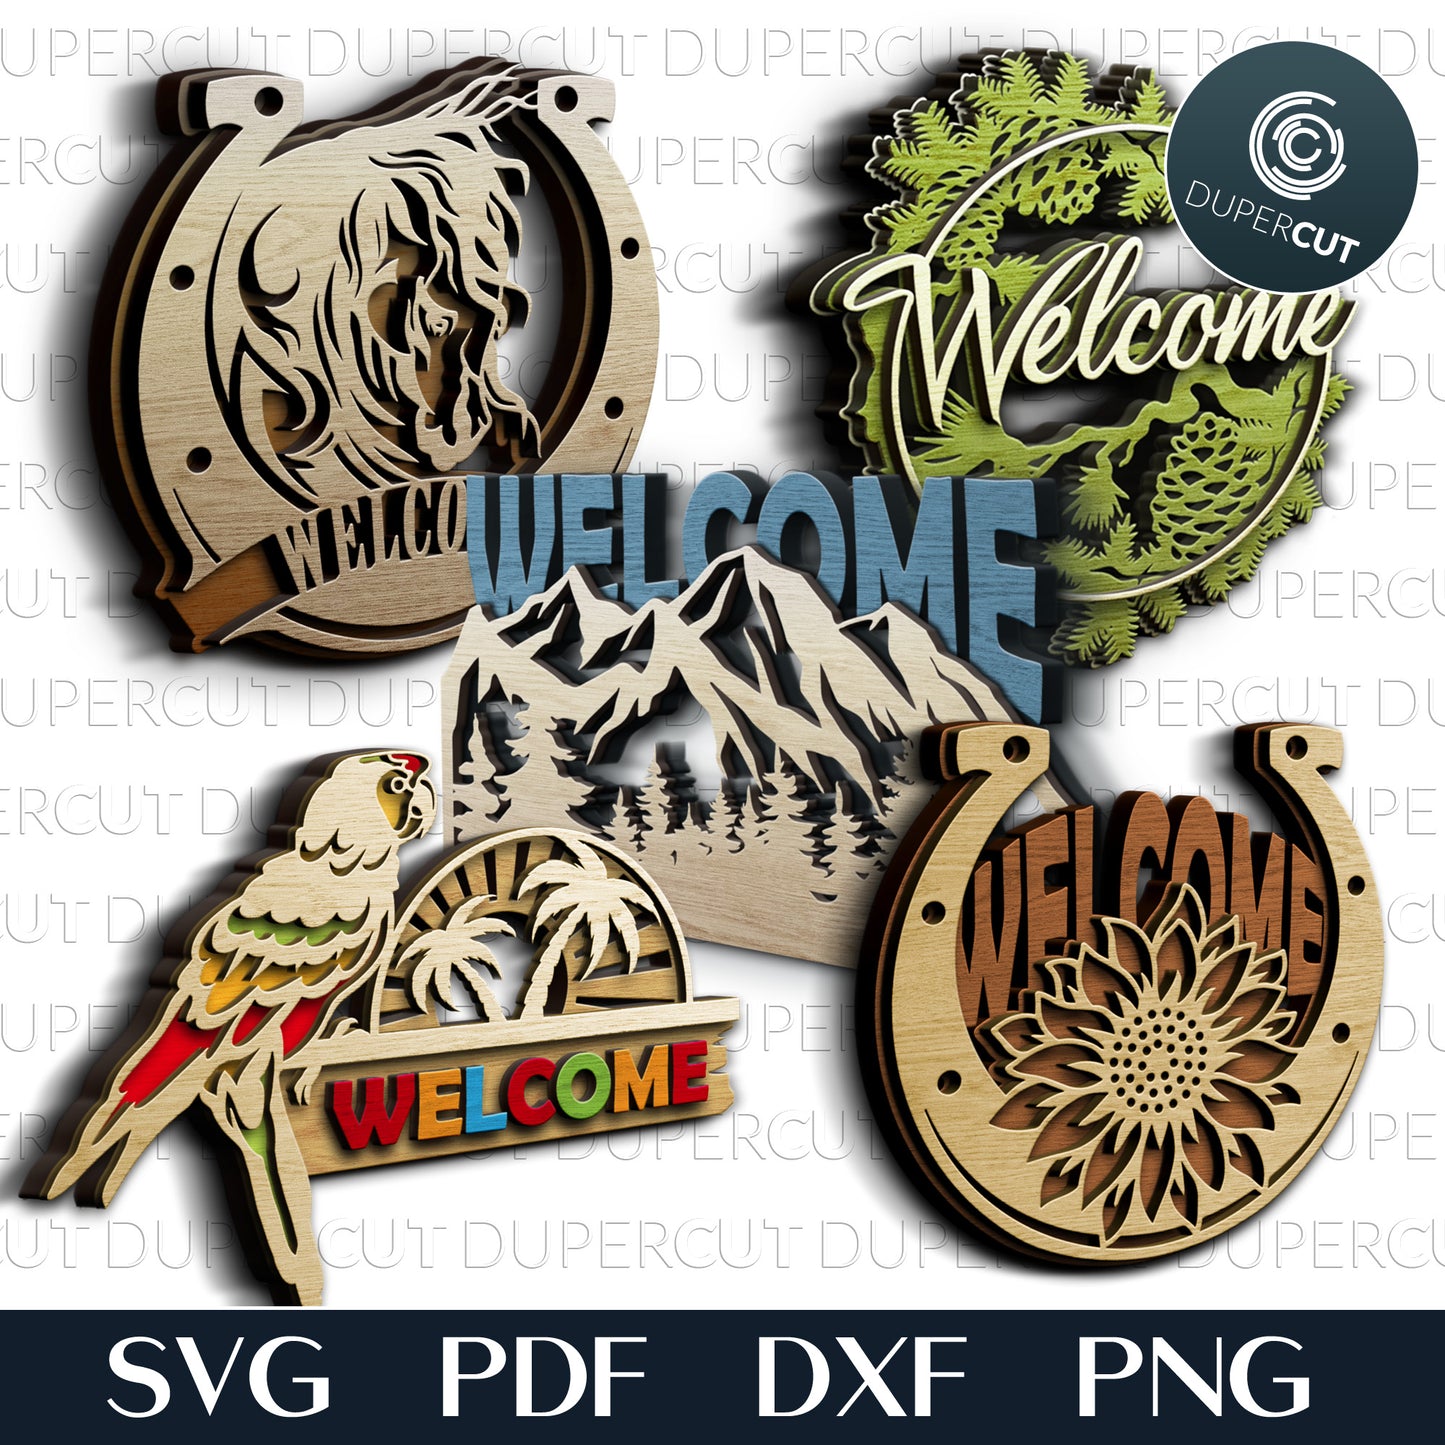 Welcome signs bundle - five designs - dual layer laser cutting files - SVG PDF DXF vector designs for Glowforge, Cricut, Silhouette Cameo, CNC plasma machines by DuperCut